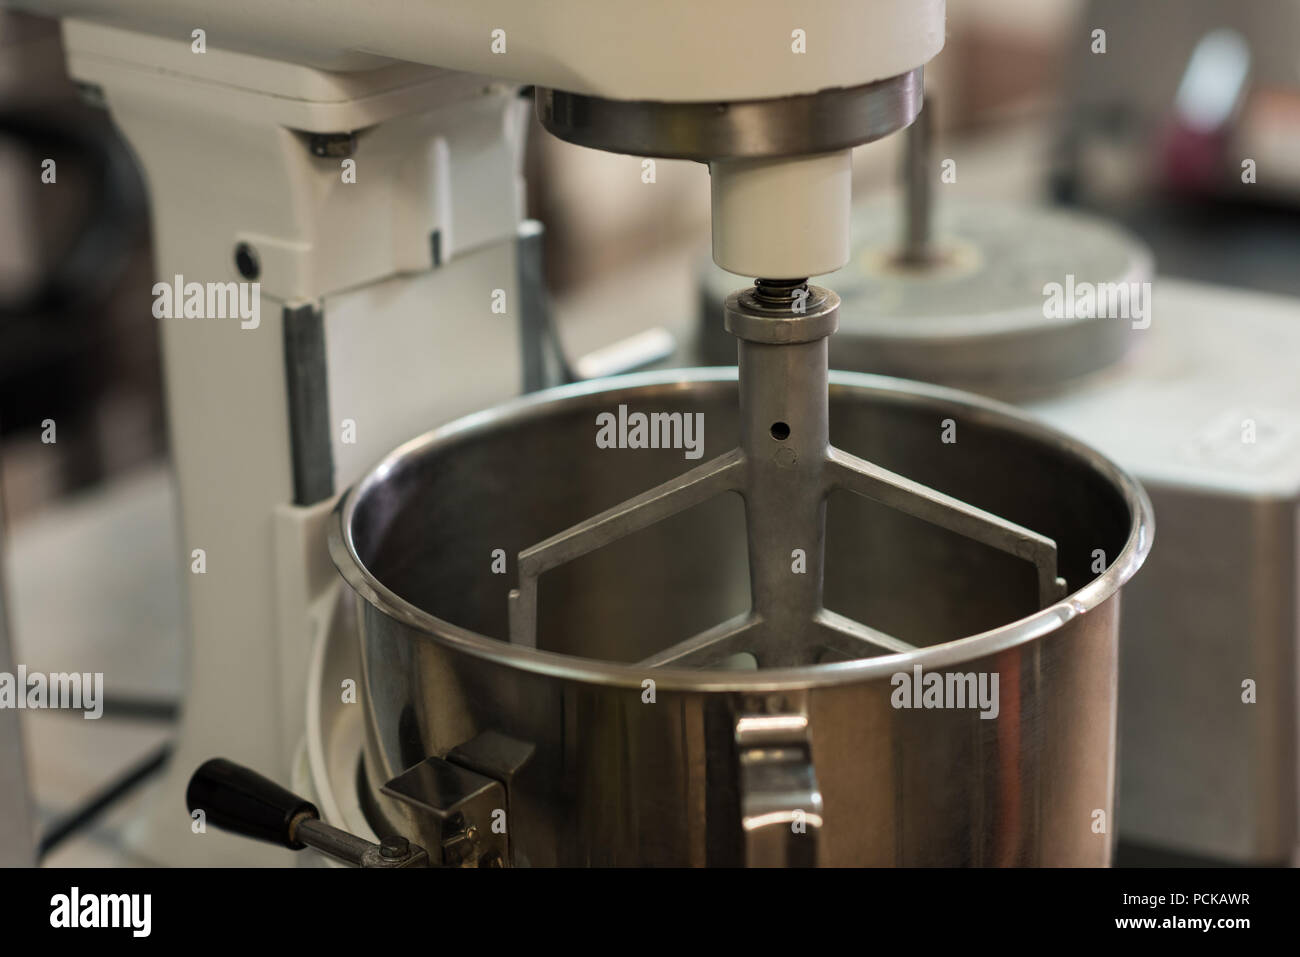 Whisking machine in commercial kitchen Stock Photo